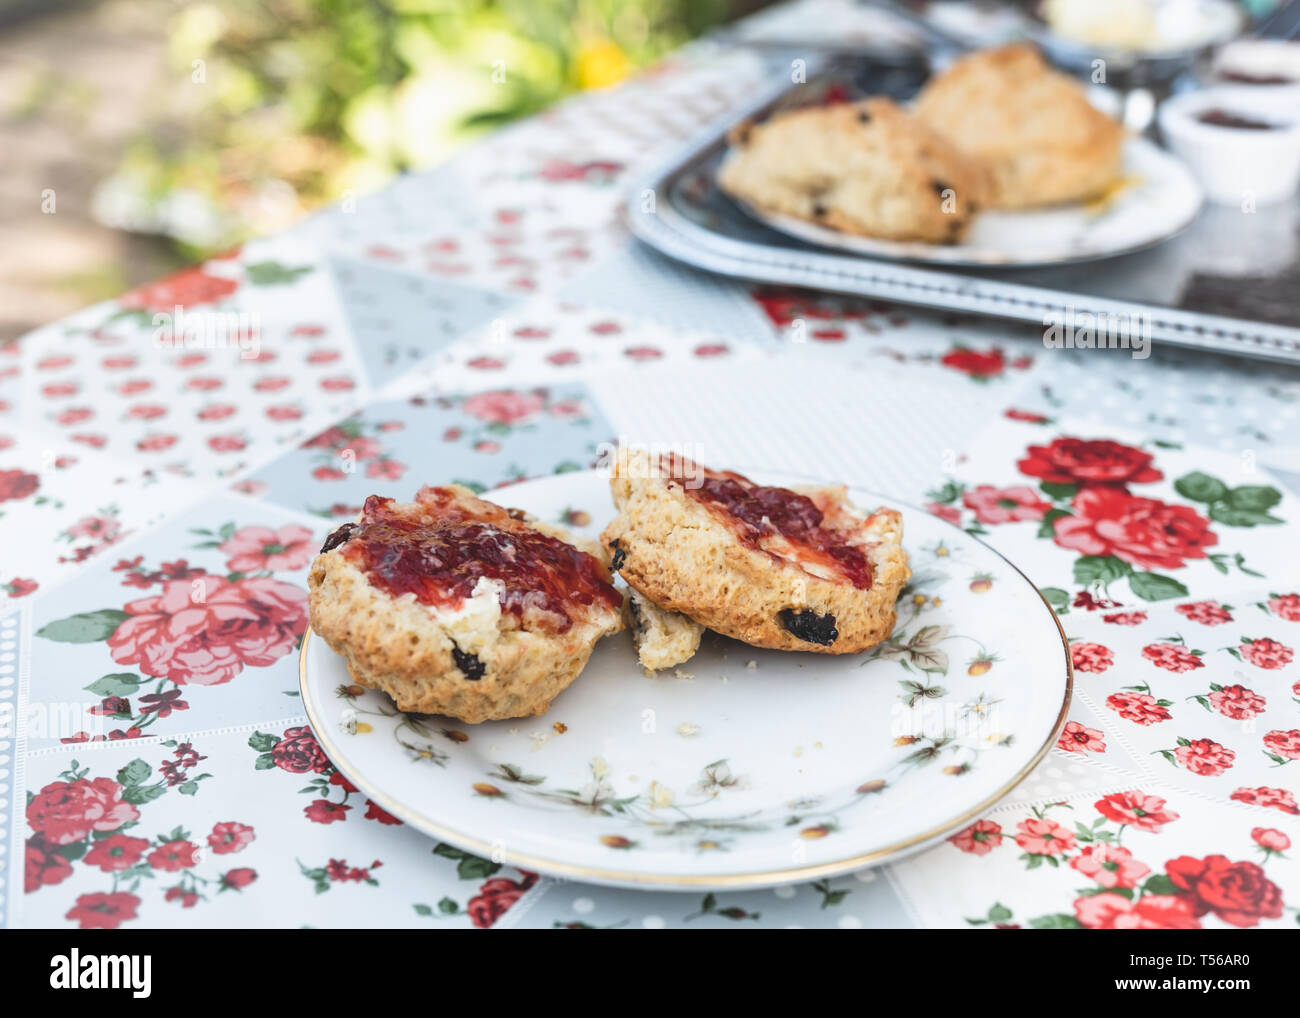 Scones with jam on for an English afternoon tea at a garden teashop. Stock Photo